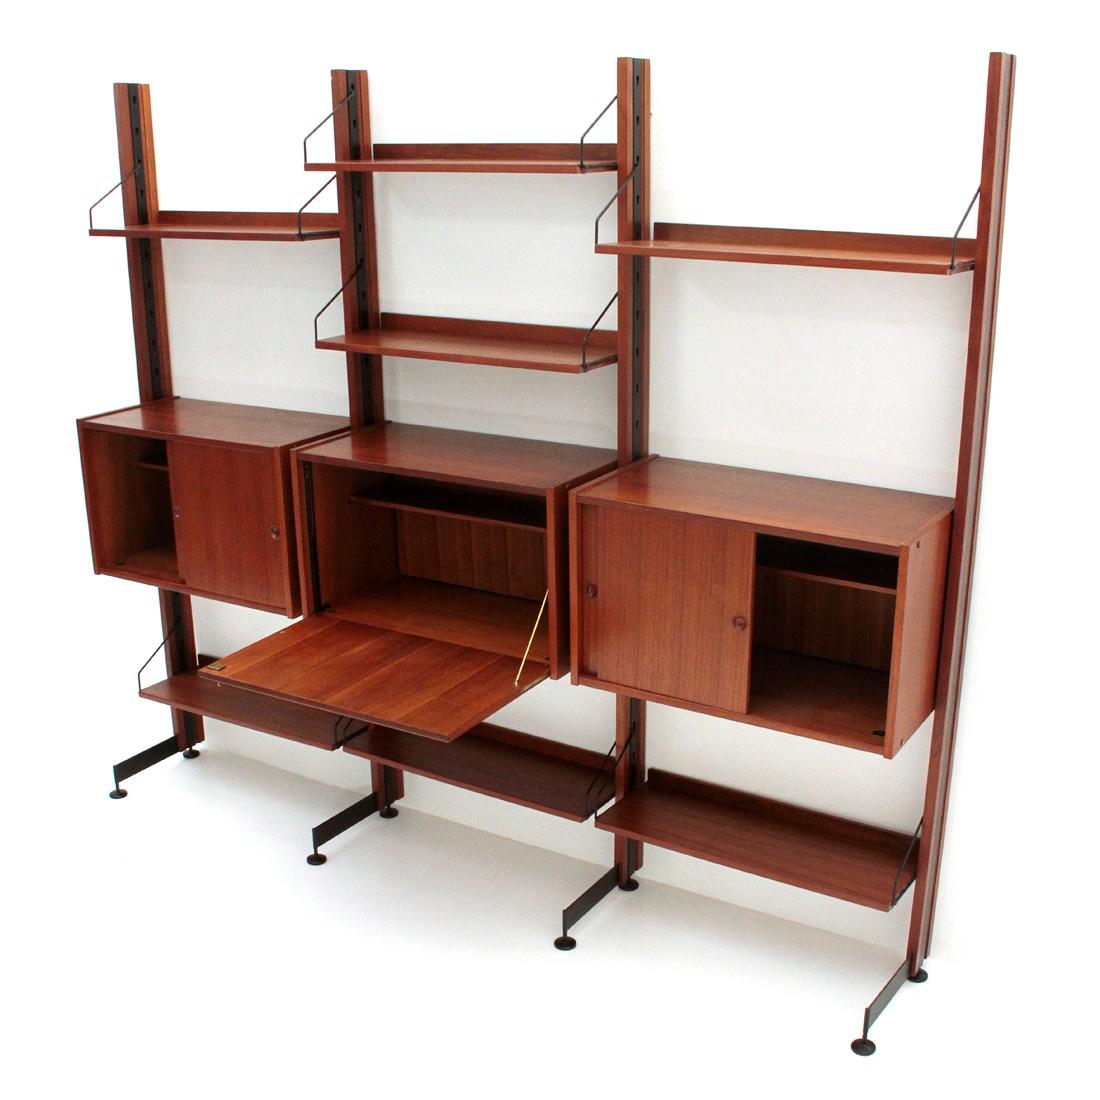 Mid-20th Century Selex Teak and Metal Wall Unit by Industrial Mobili Barovero, 1960s